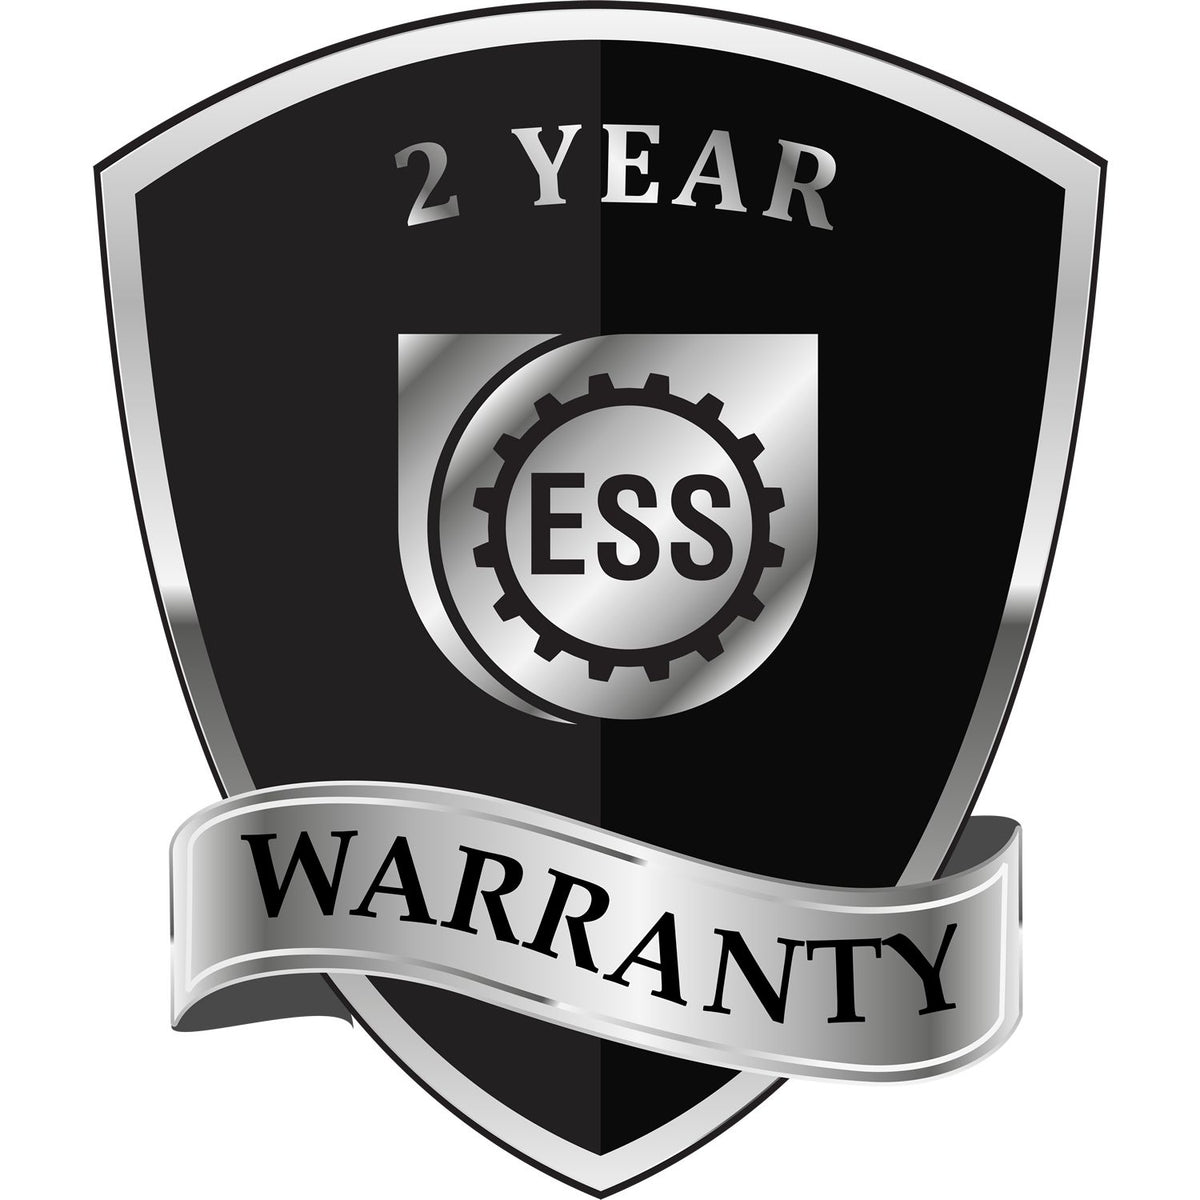 A badge or emblem showing a warranty icon for the State of Florida Long Reach Architectural Embossing Seal